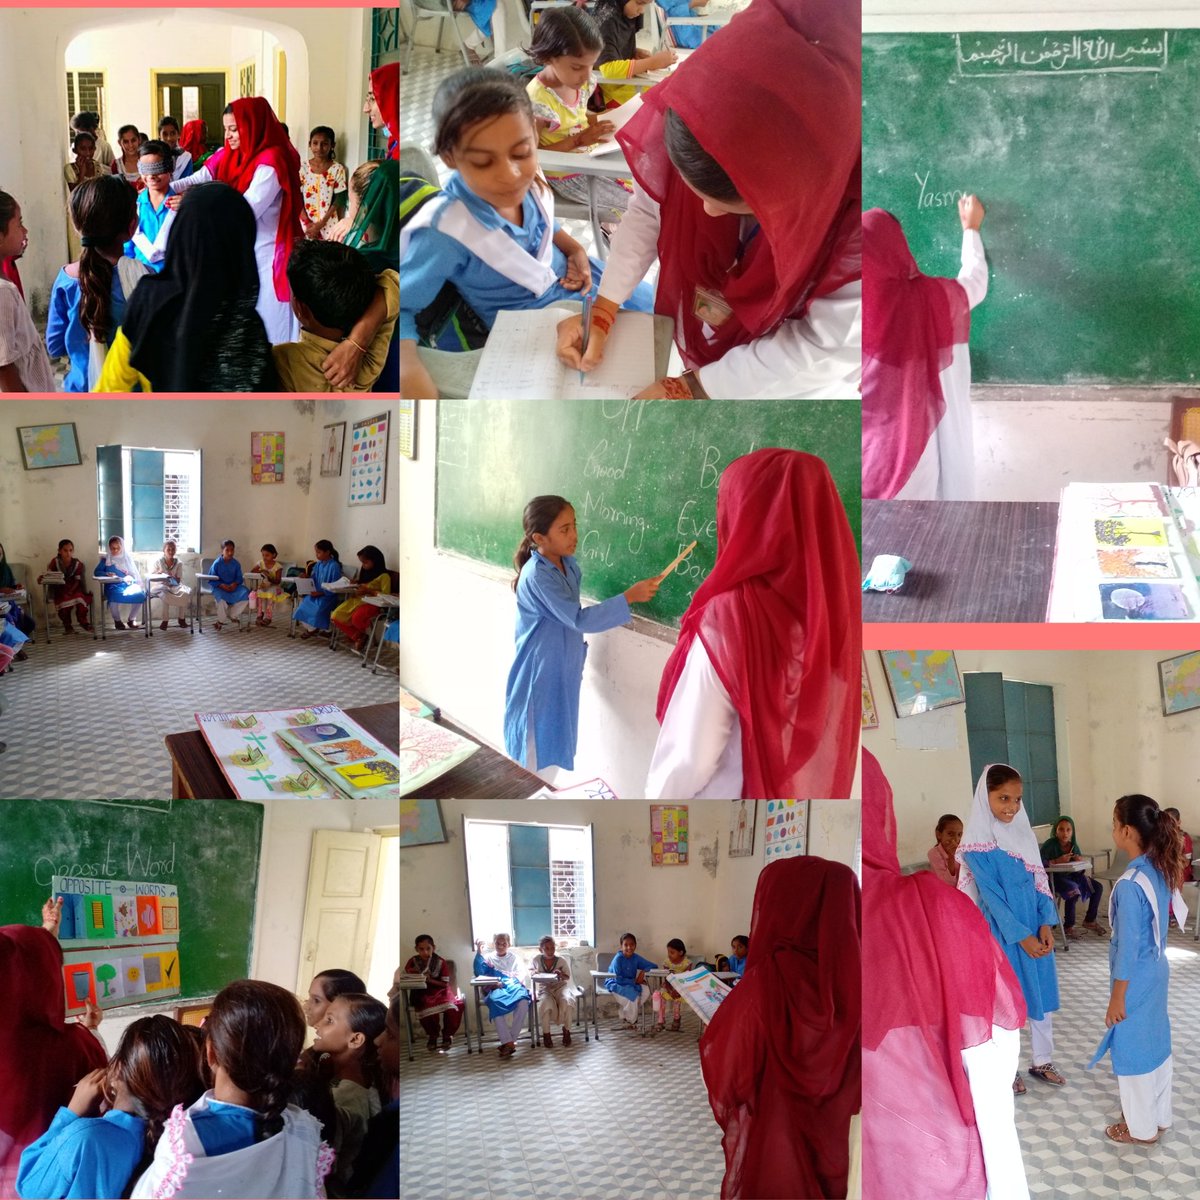 First experience of teaching those children who are Thirsty for getting education feeling very happy to teach these little flowers
#teachingpracticum 
#LetsEducatethar 
#LetsEducateGirls